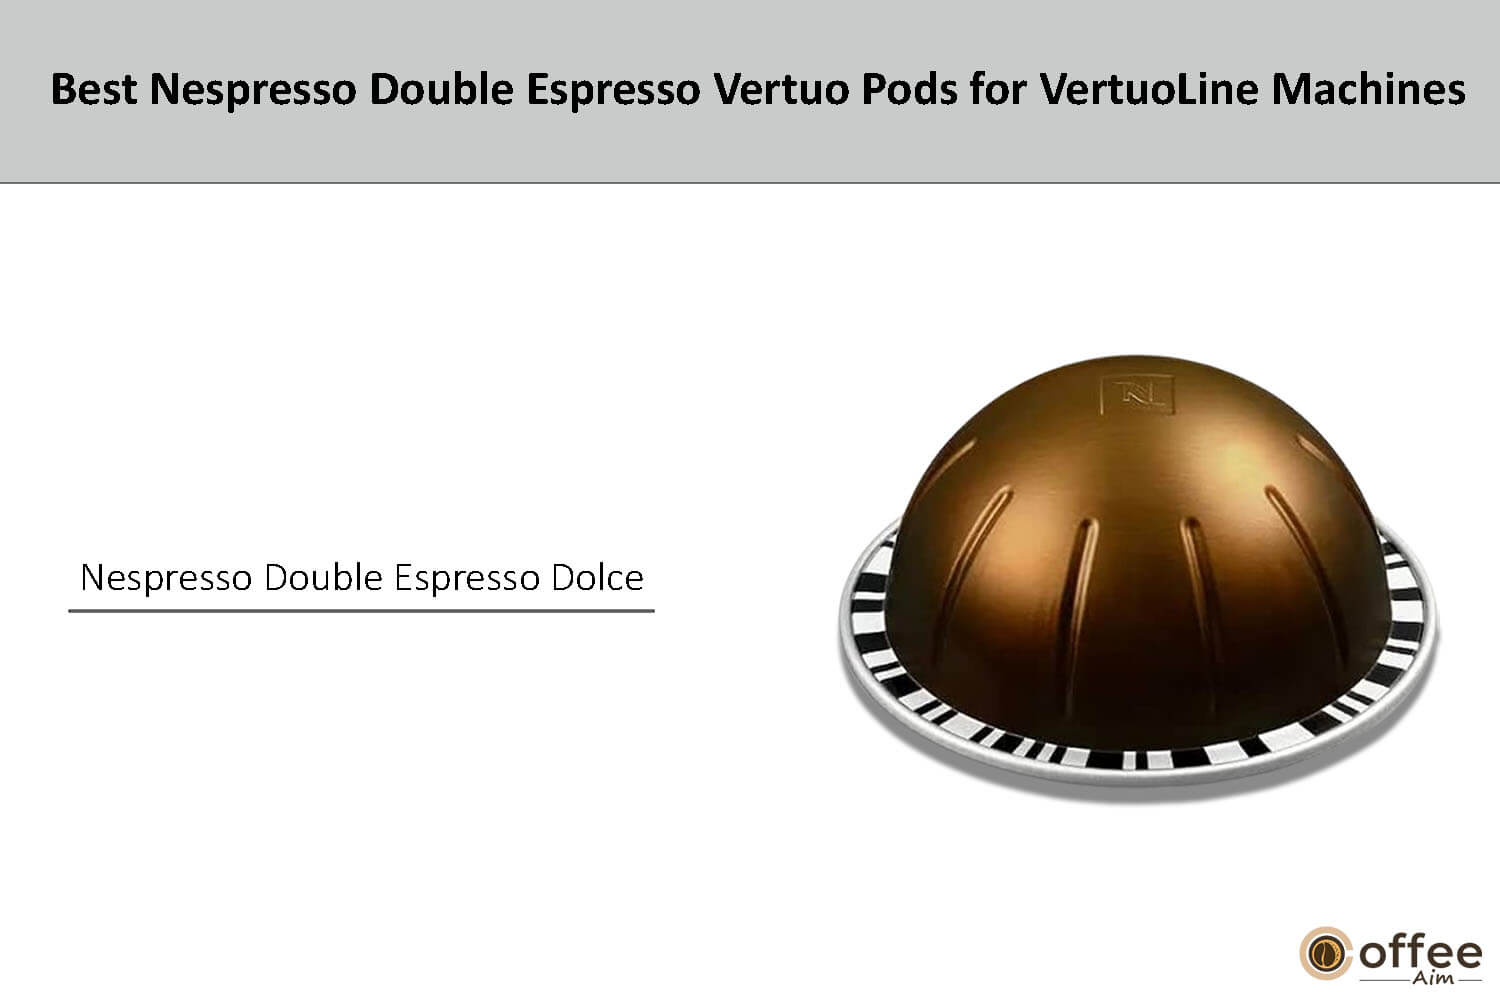 In this image, I'll explain nespresso double espresso dolce.